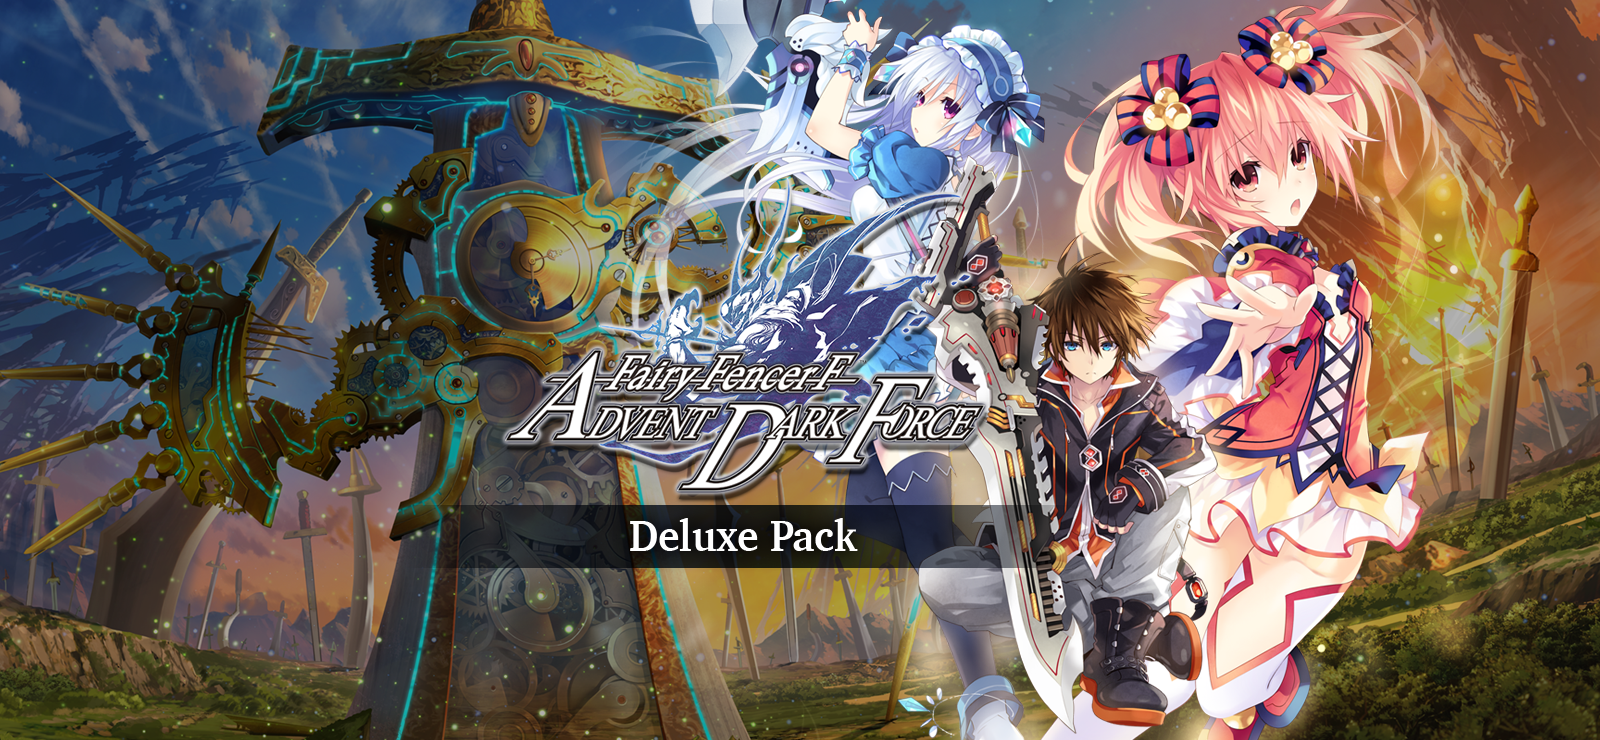 Fairy Fencer F: Advent Dark Force - Deluxe Pack